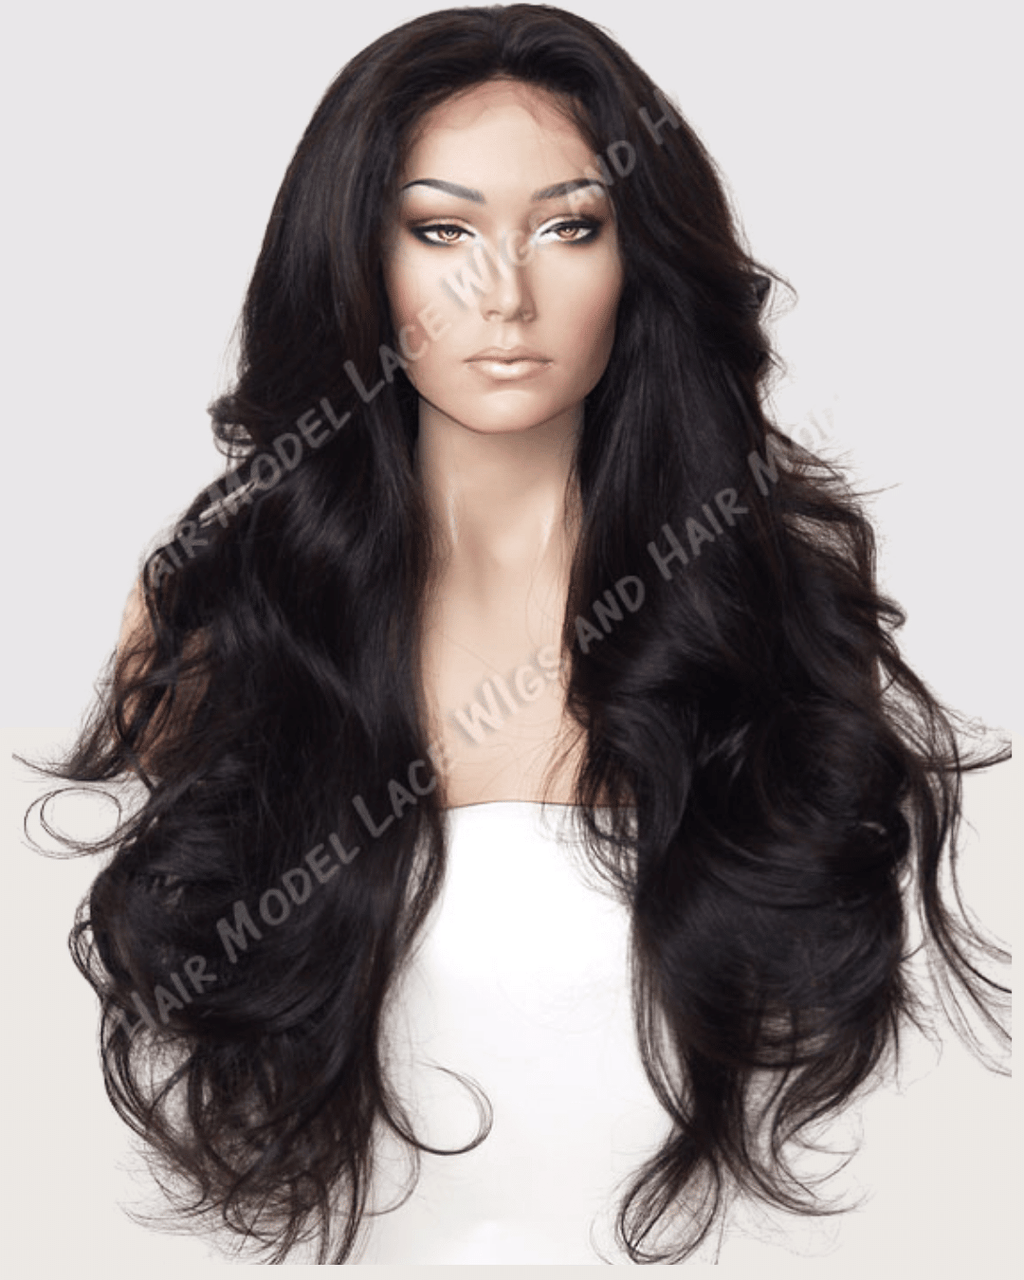 A portrait of a mannequin head wearing a lace front wig with long, black, wavy hair. The wig has a side parting and the waves start from mid-length, flowing down to the ends, creating a natural and voluminous appearance.